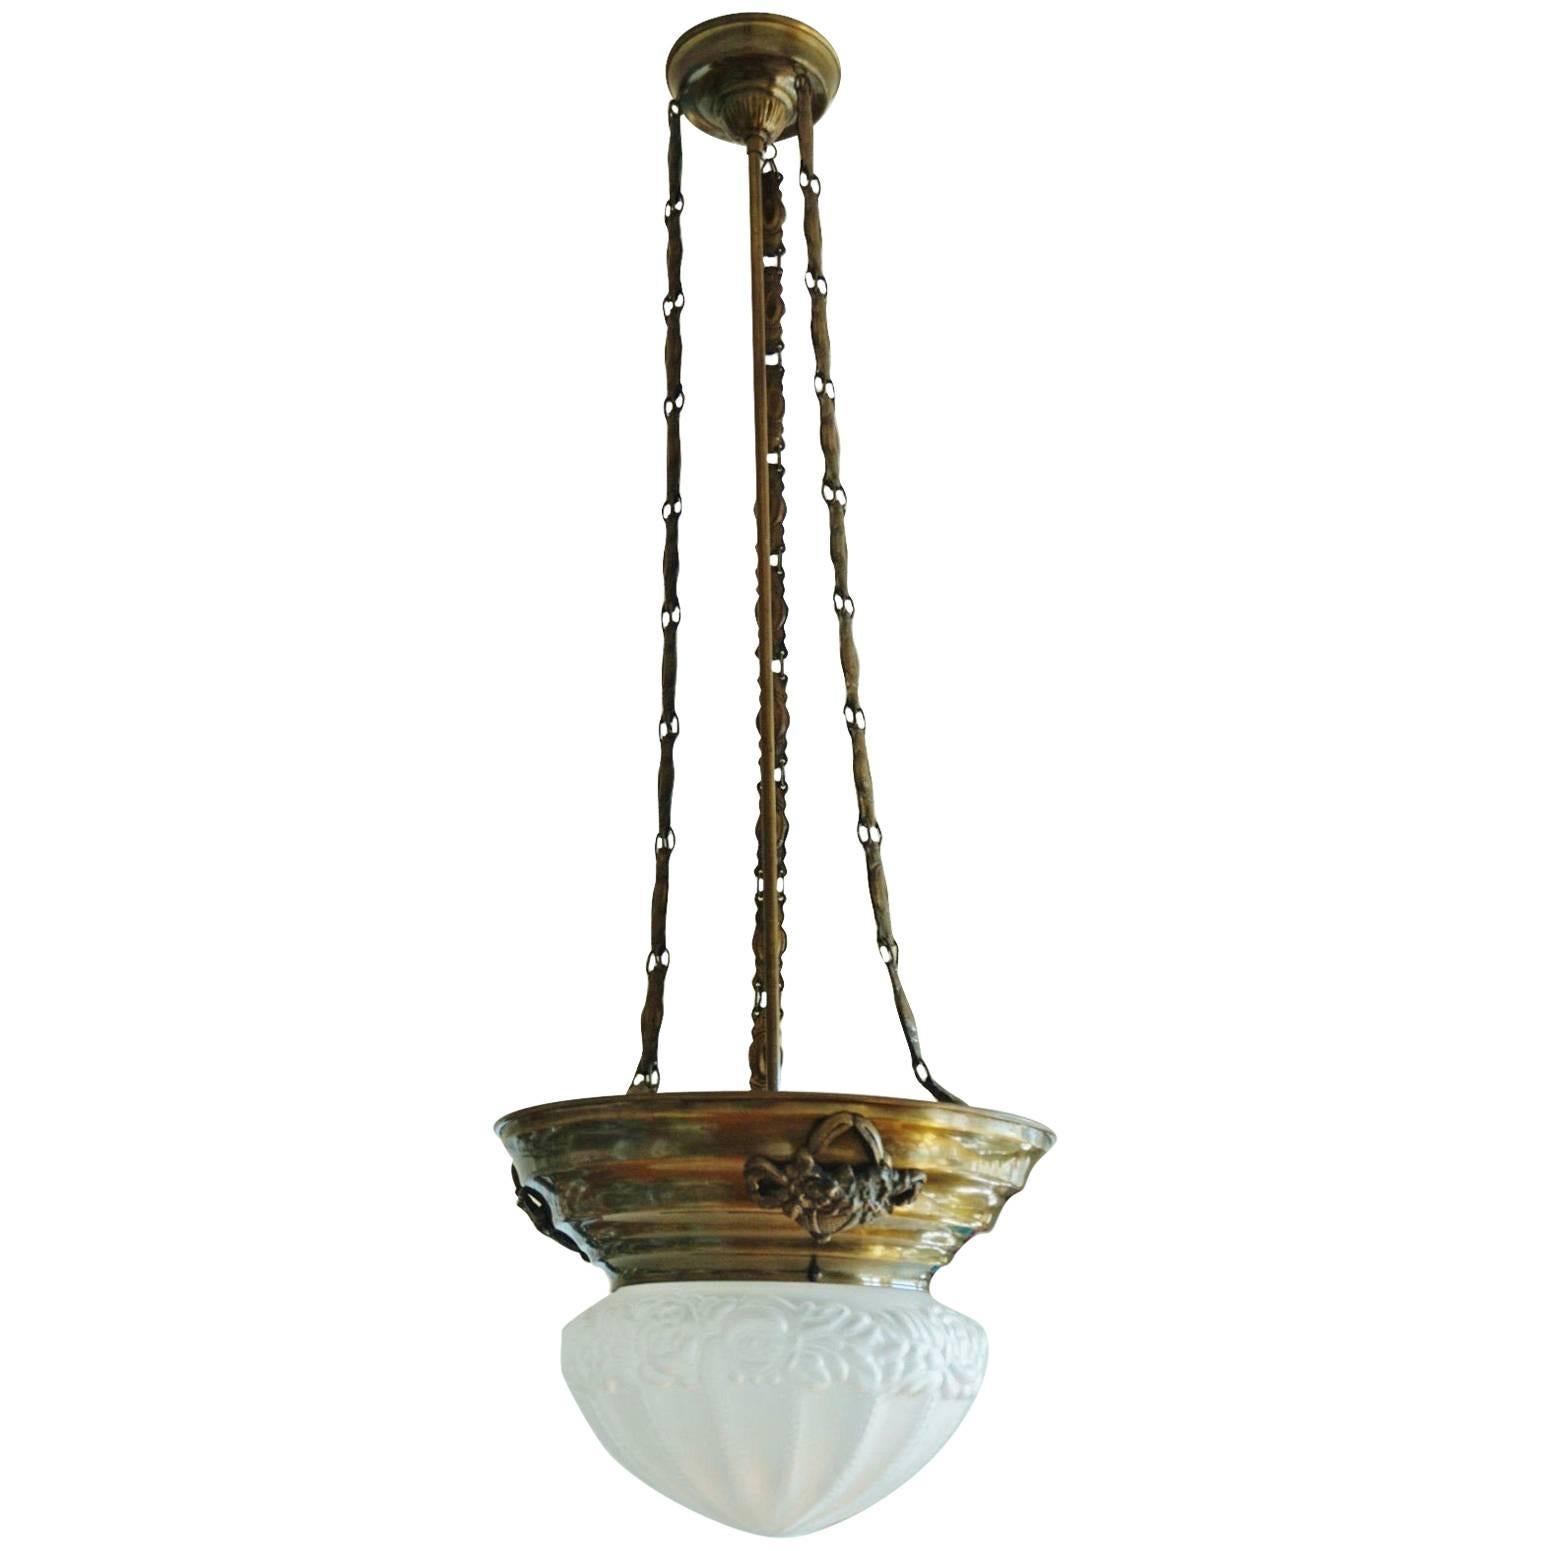 Art Nouveau Style Brass Pendant, Lantern with Frosted Glass Shade, circa 1920